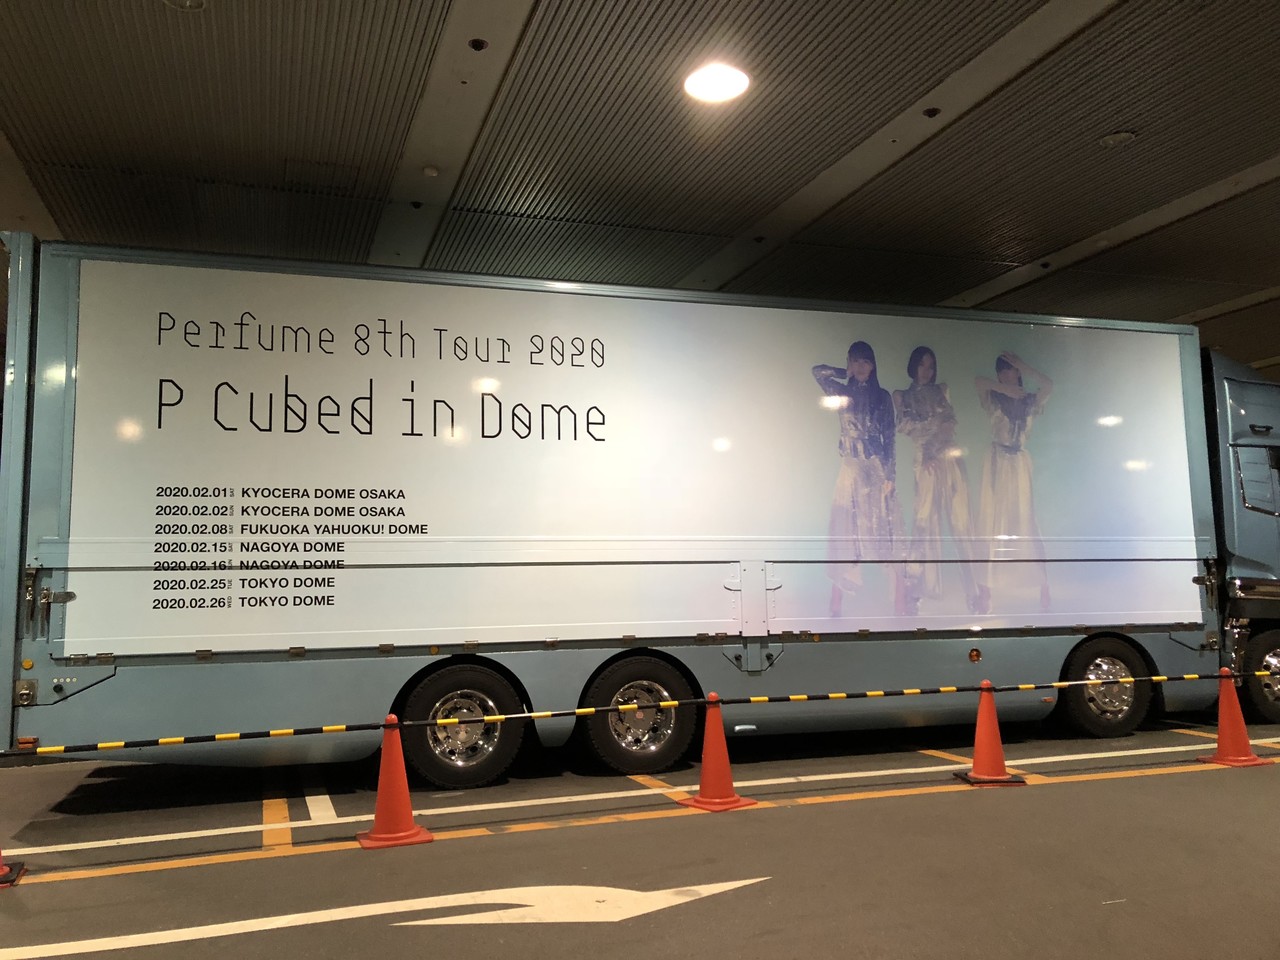 Perfume 8th Tour 2020 P Cubed In Dome 京セラドーム2 1 レポート れ